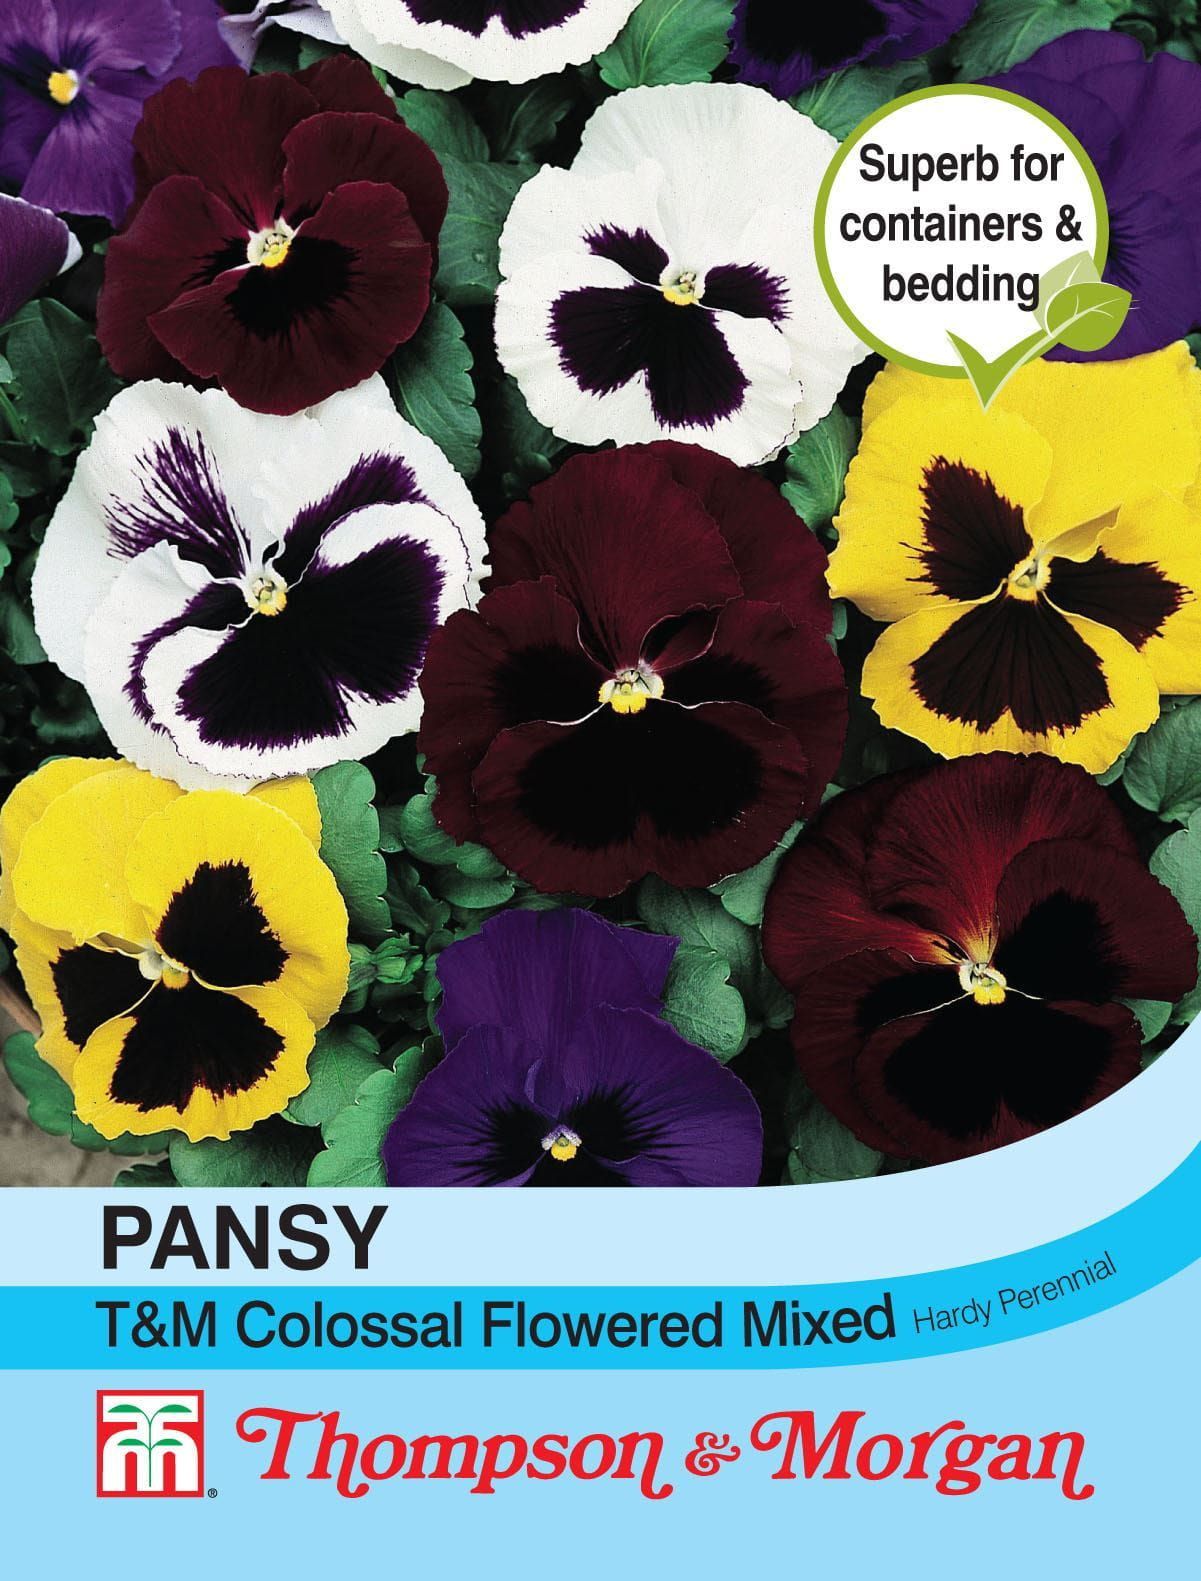 Thompson & Morgan Pansy T&M Colossal ed Mixed 130 Seed